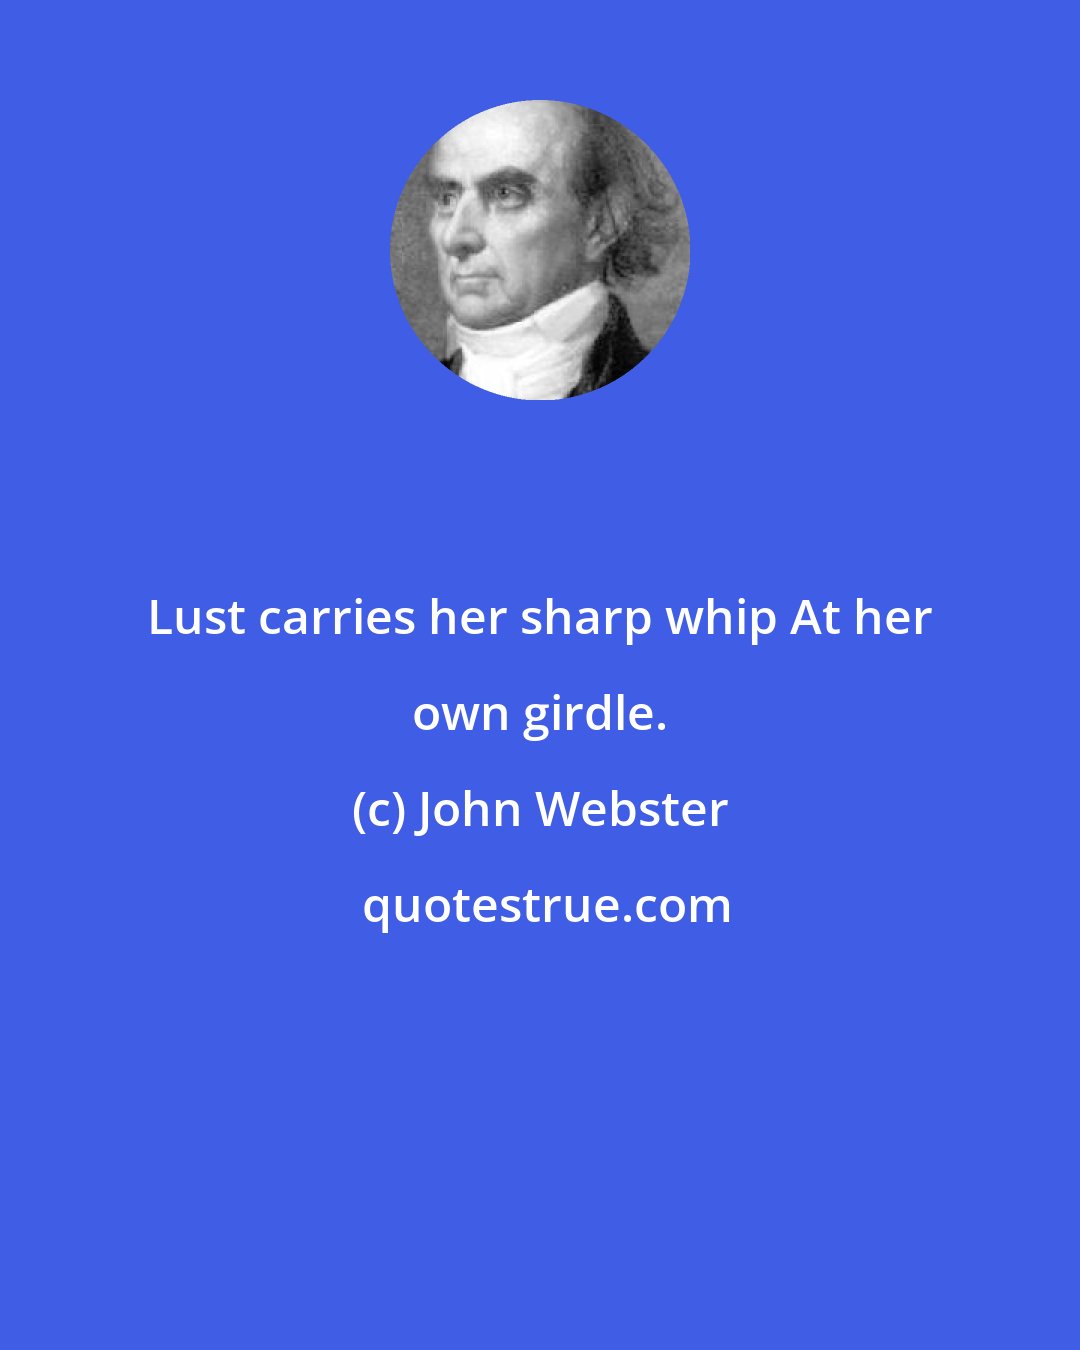 John Webster: Lust carries her sharp whip At her own girdle.